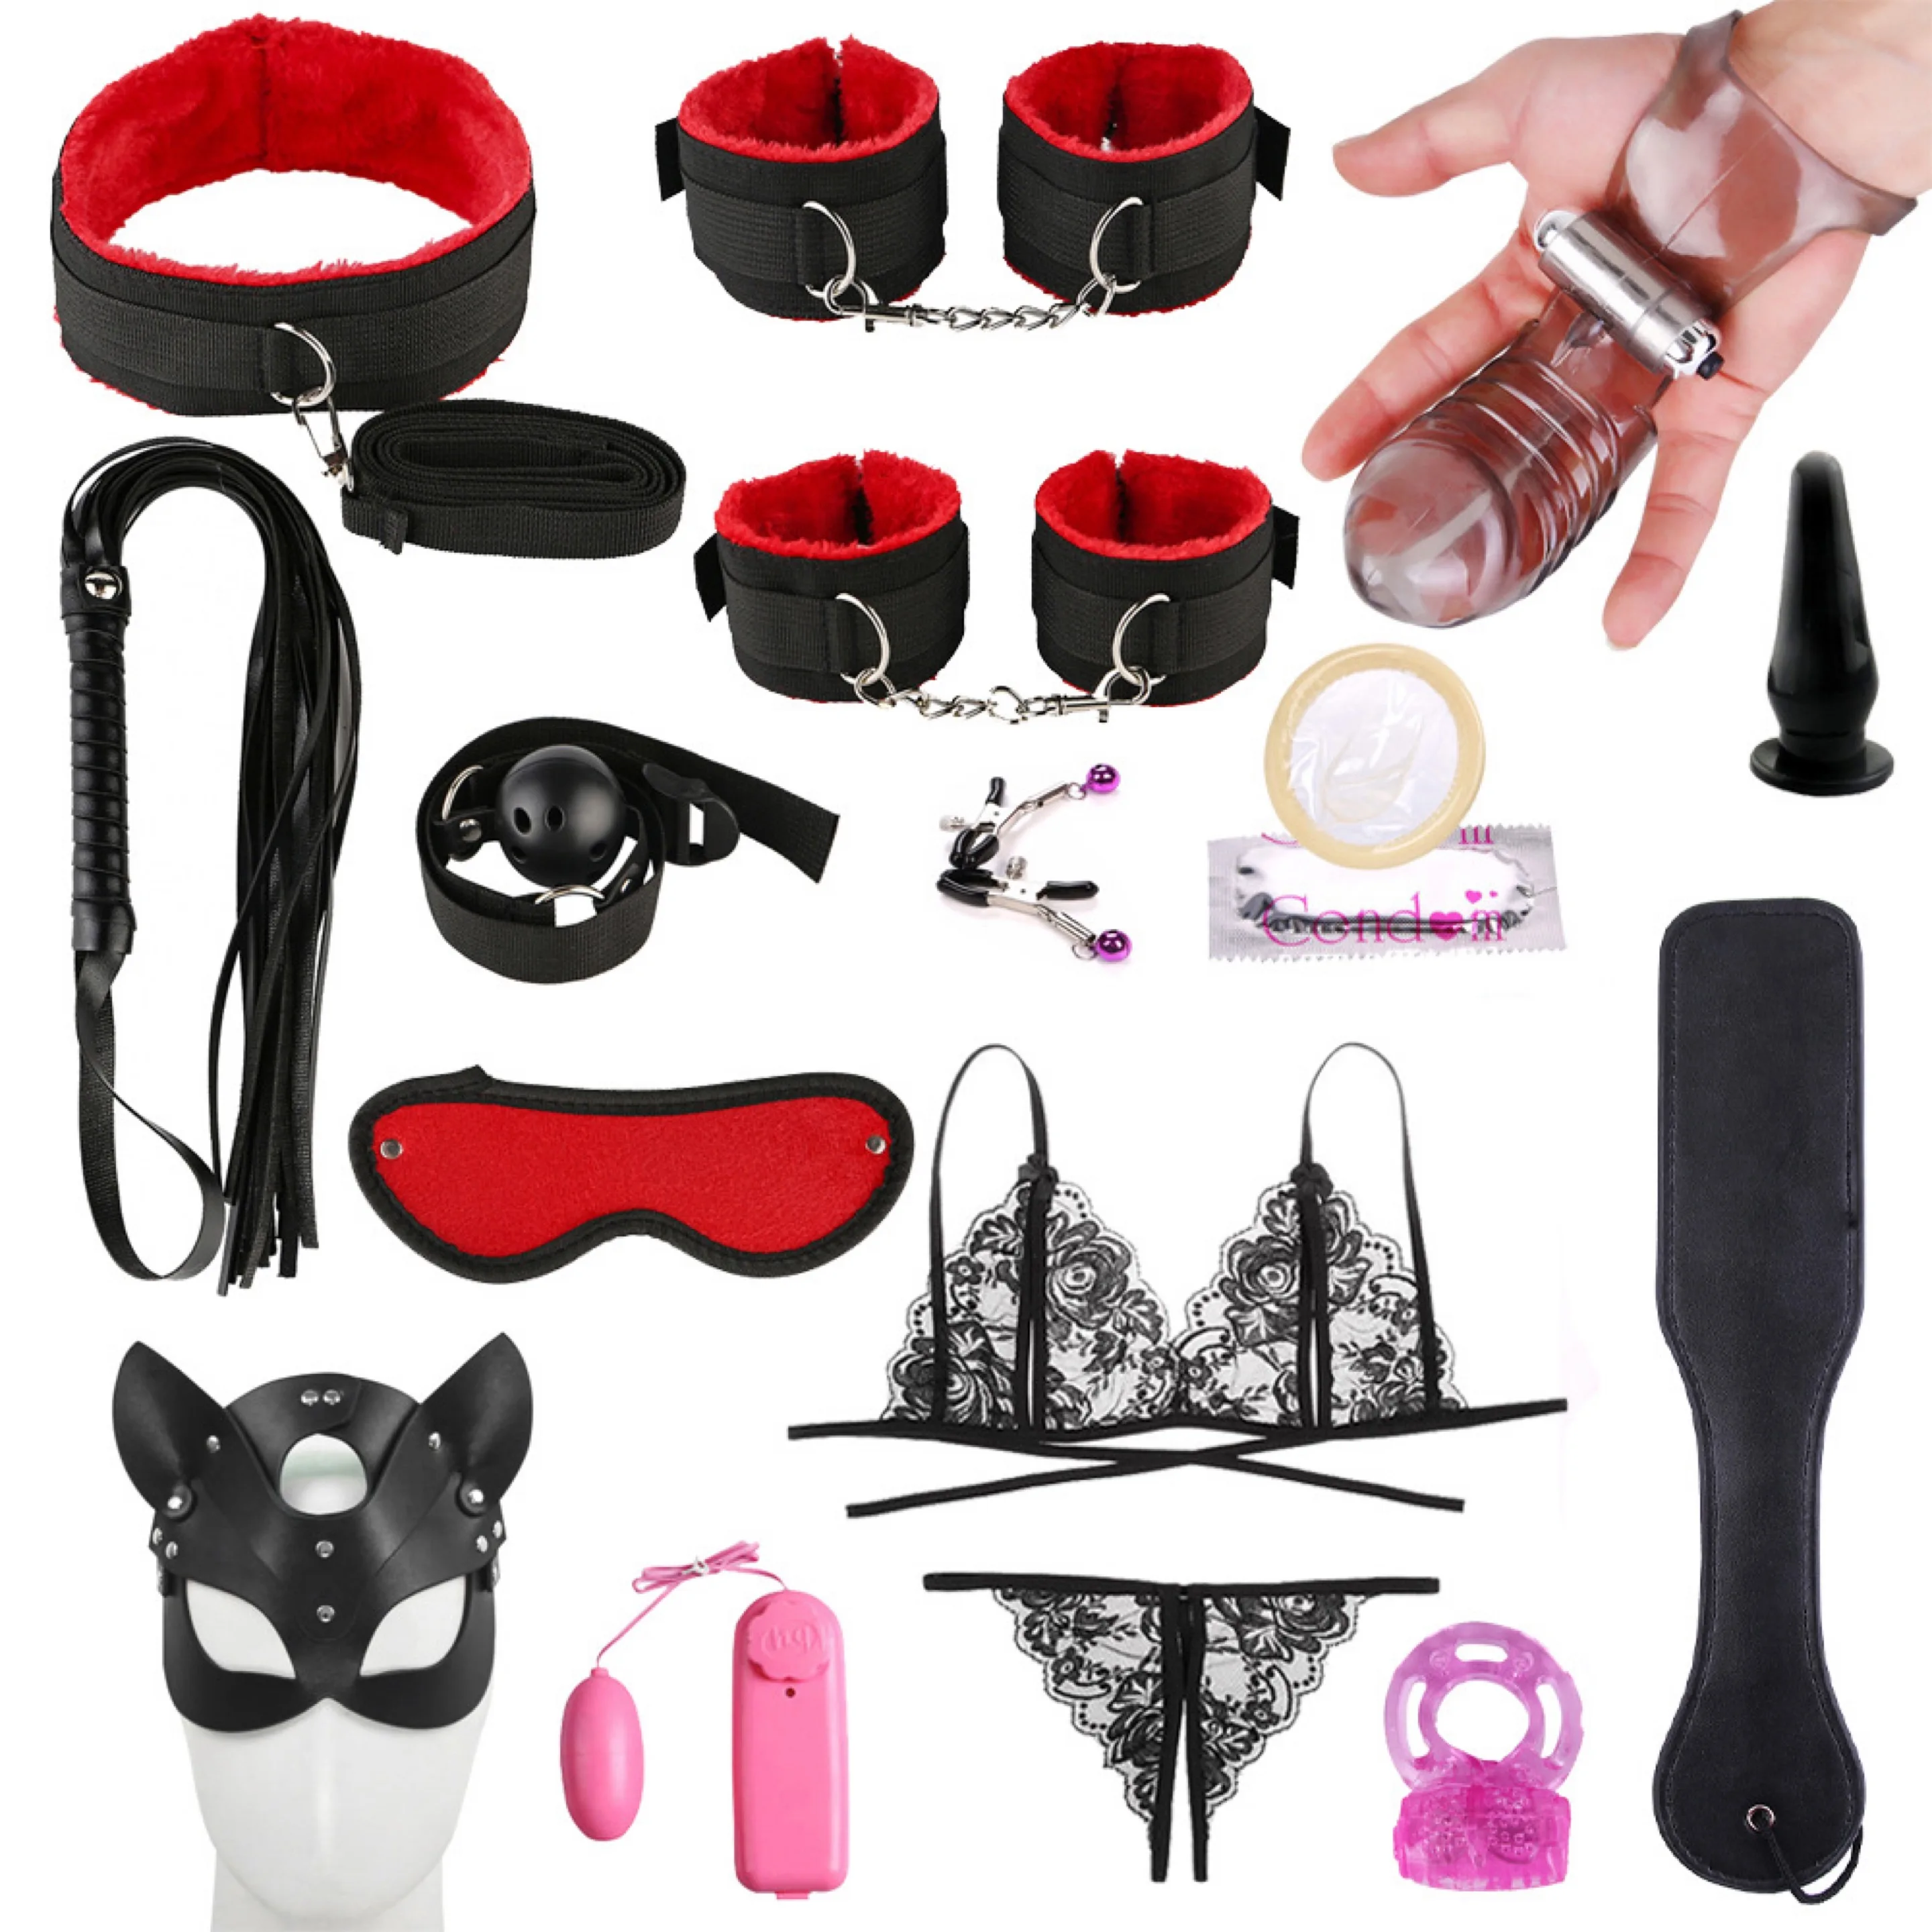 Wholesale 16pcs set Sex Toys Bondage gear sex toys for woman Handcuffs Whip anal plug husband and wife toys vibrators fetish sm Products From m.alibaba